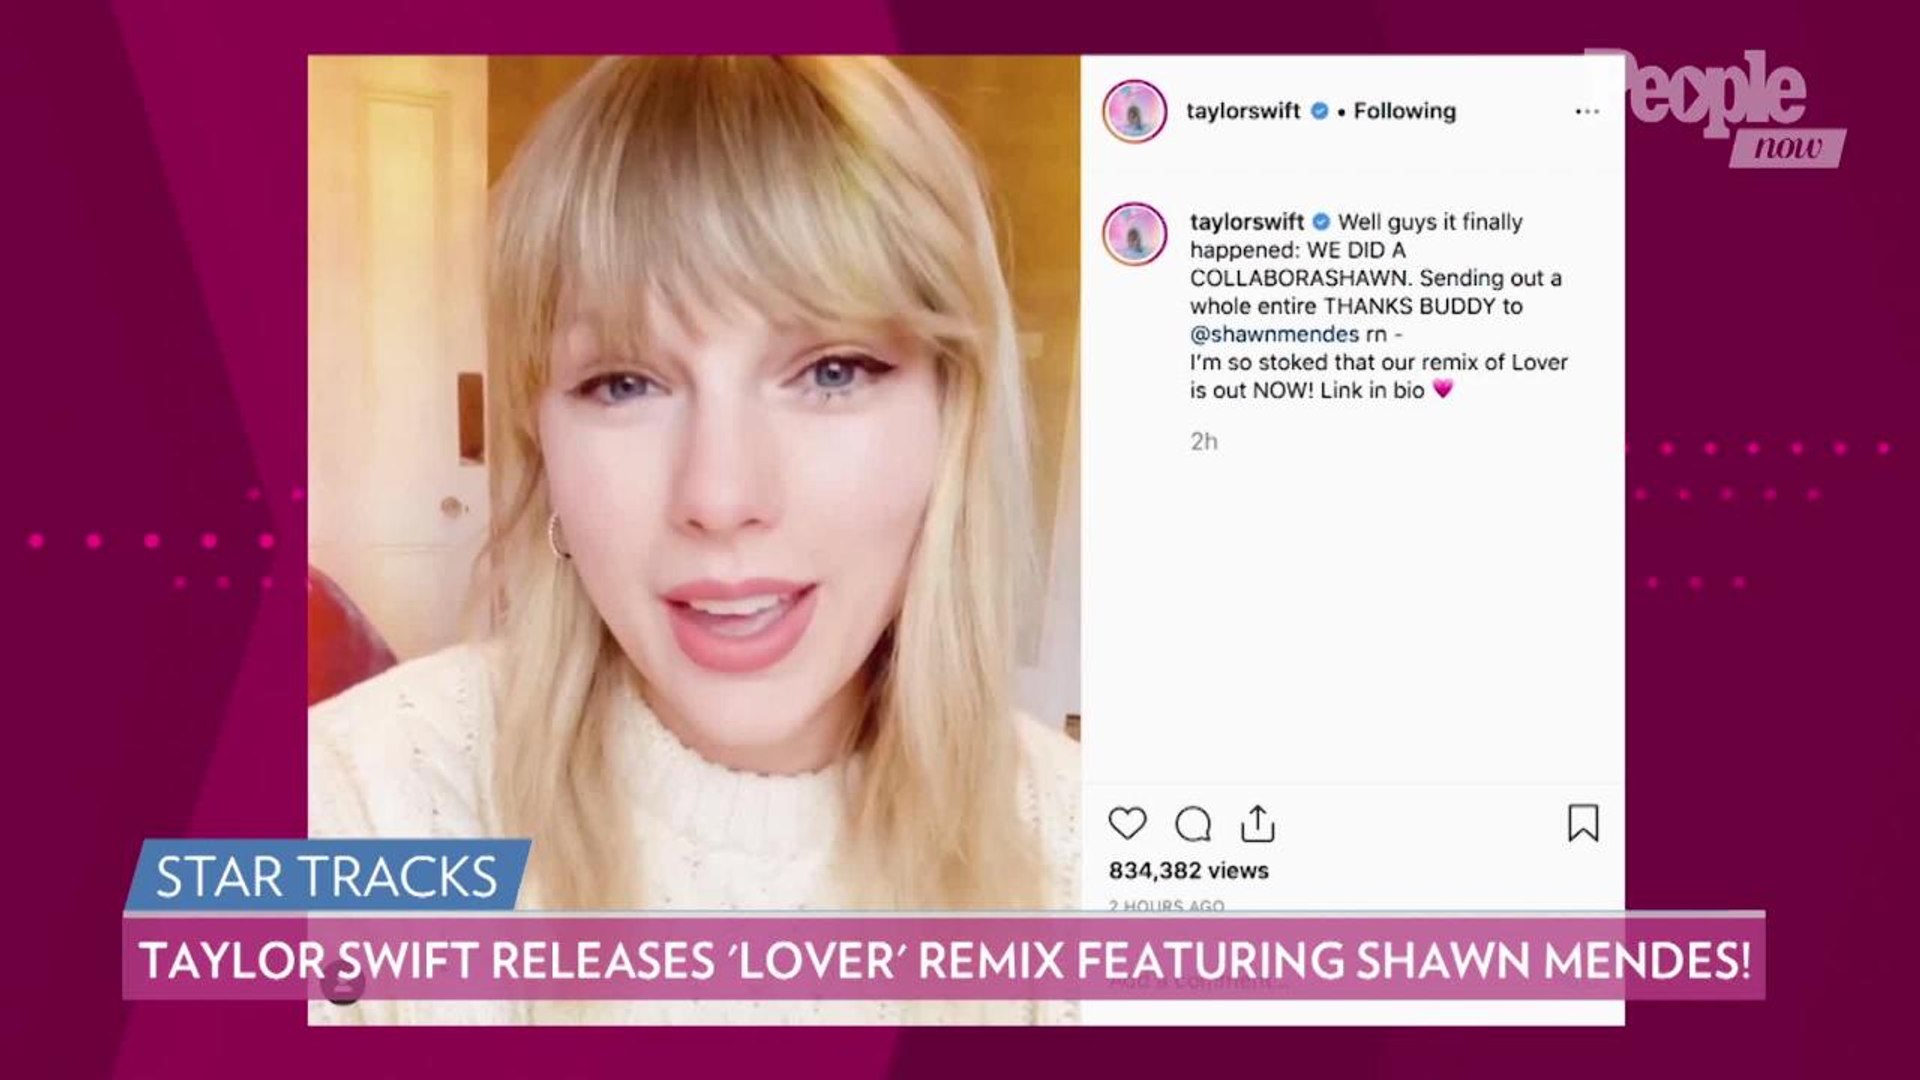 A Collaborashawn To Remember Taylor Swift And Shawn Mendes Release Remix Of Lover